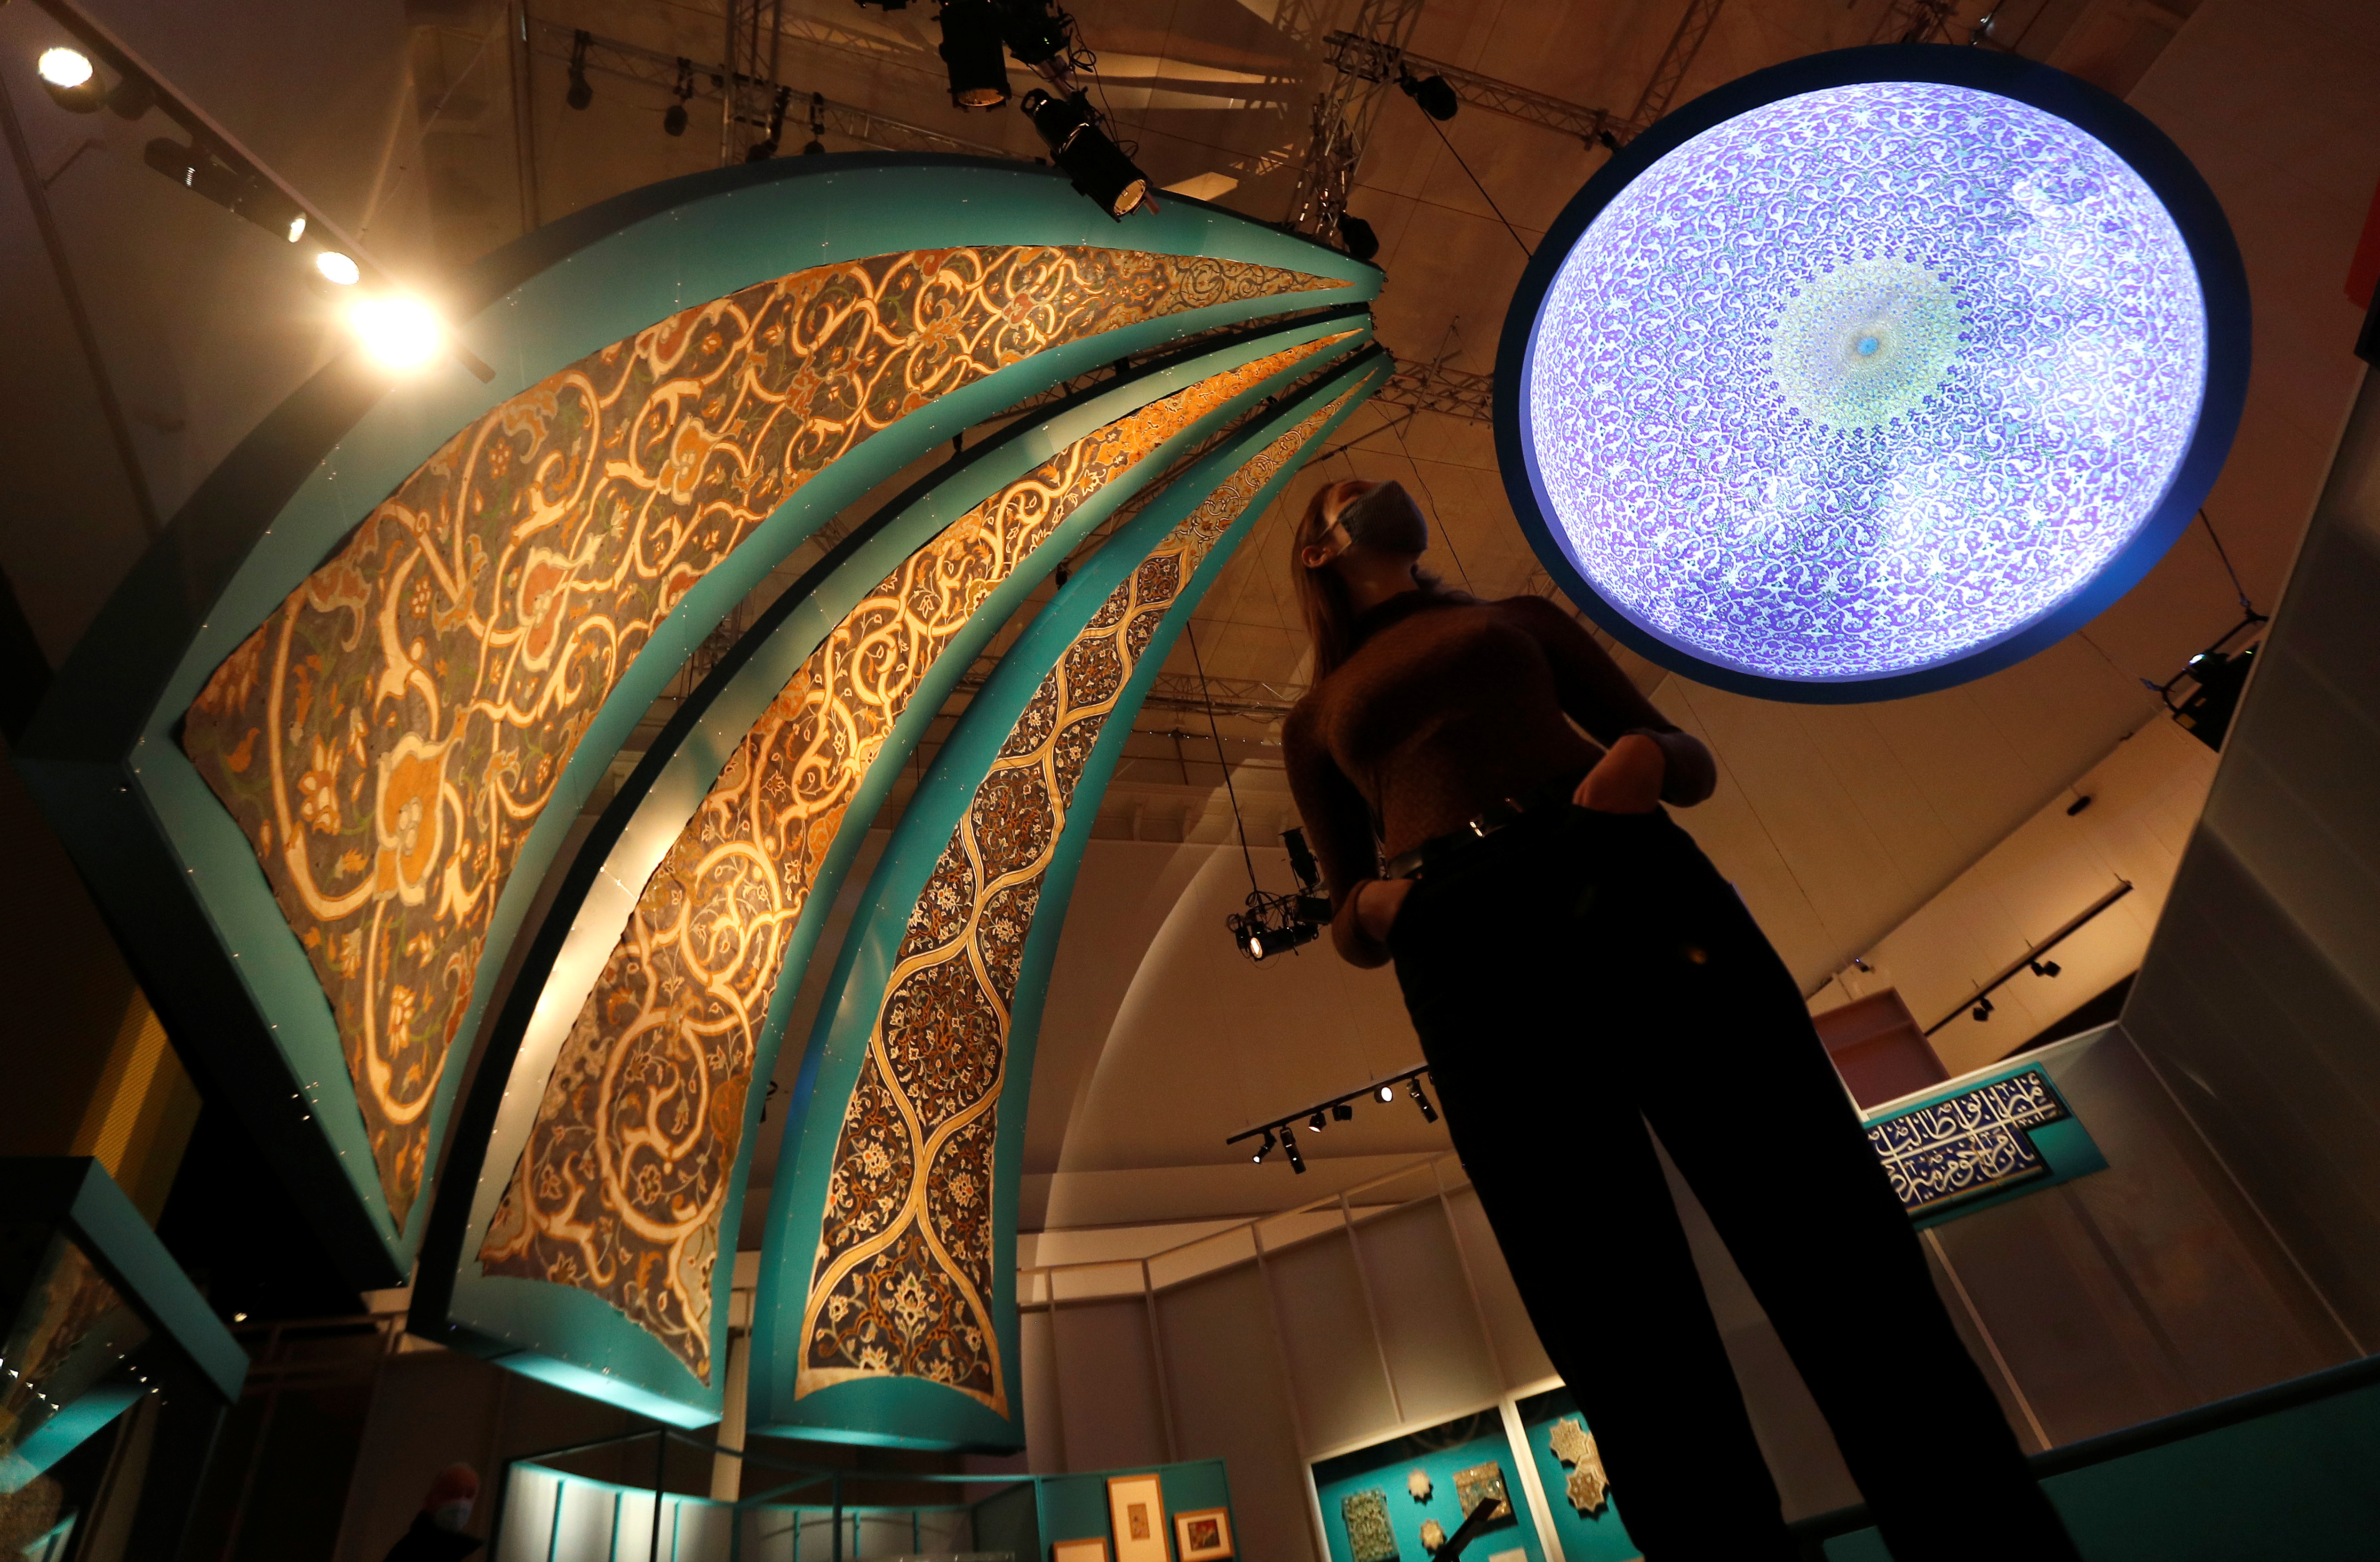 A V&A employee looks up at the Dome Projection and triangular paintings recreating tiled interiors of mosque domes in Isfahan which are on display at Epic Iran, an exhibition soon to open at the V&A in London, Britain, May 25, 2021. REUTERS/Peter Nicholls